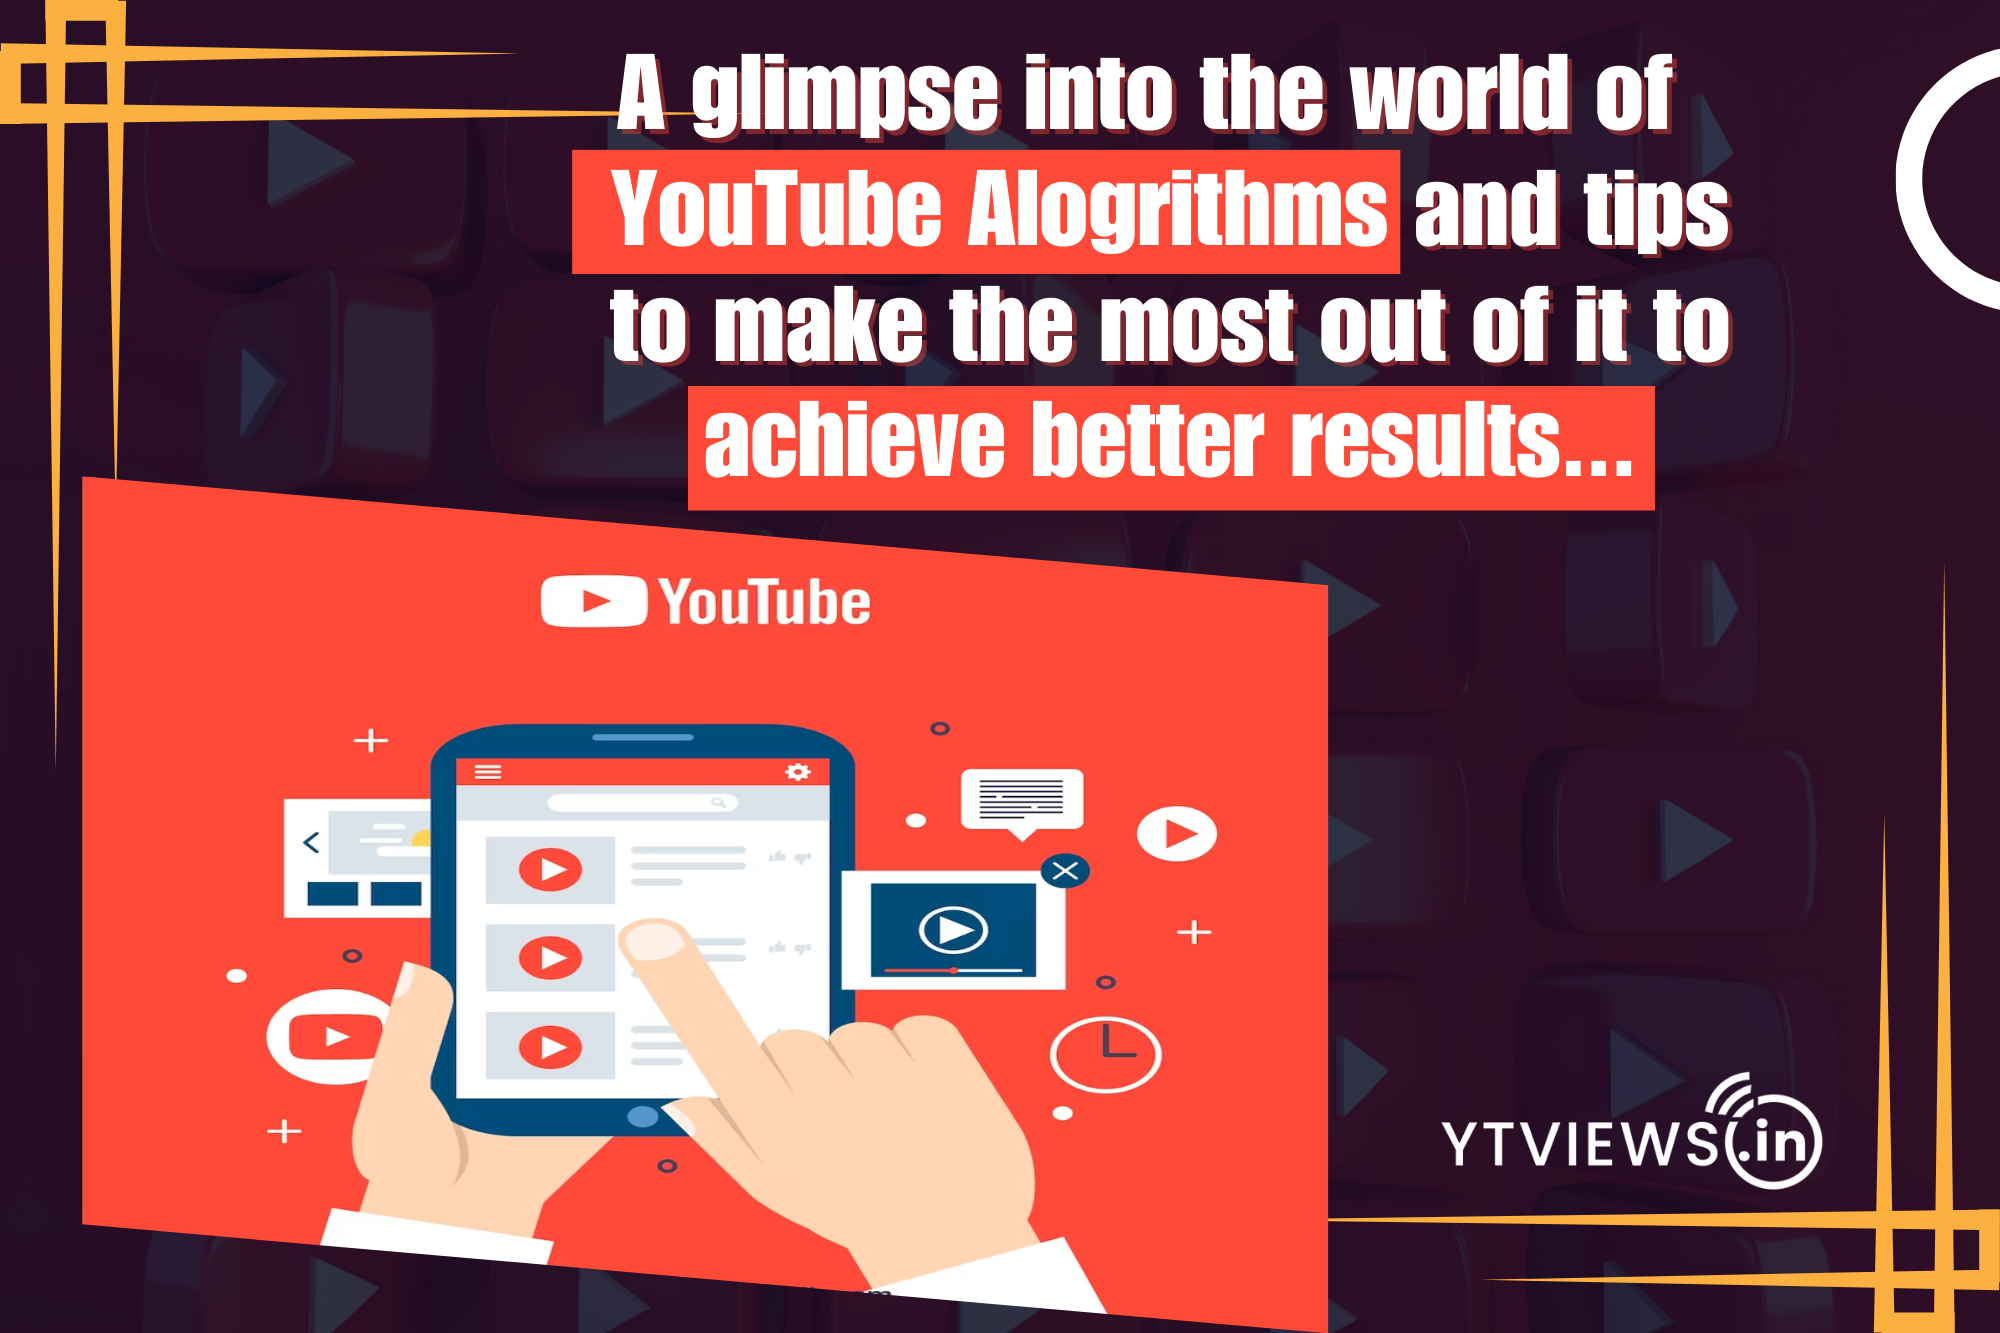 A glimpse into the world of YouTube algorithms and tips to make the most out of it to achieve better results.